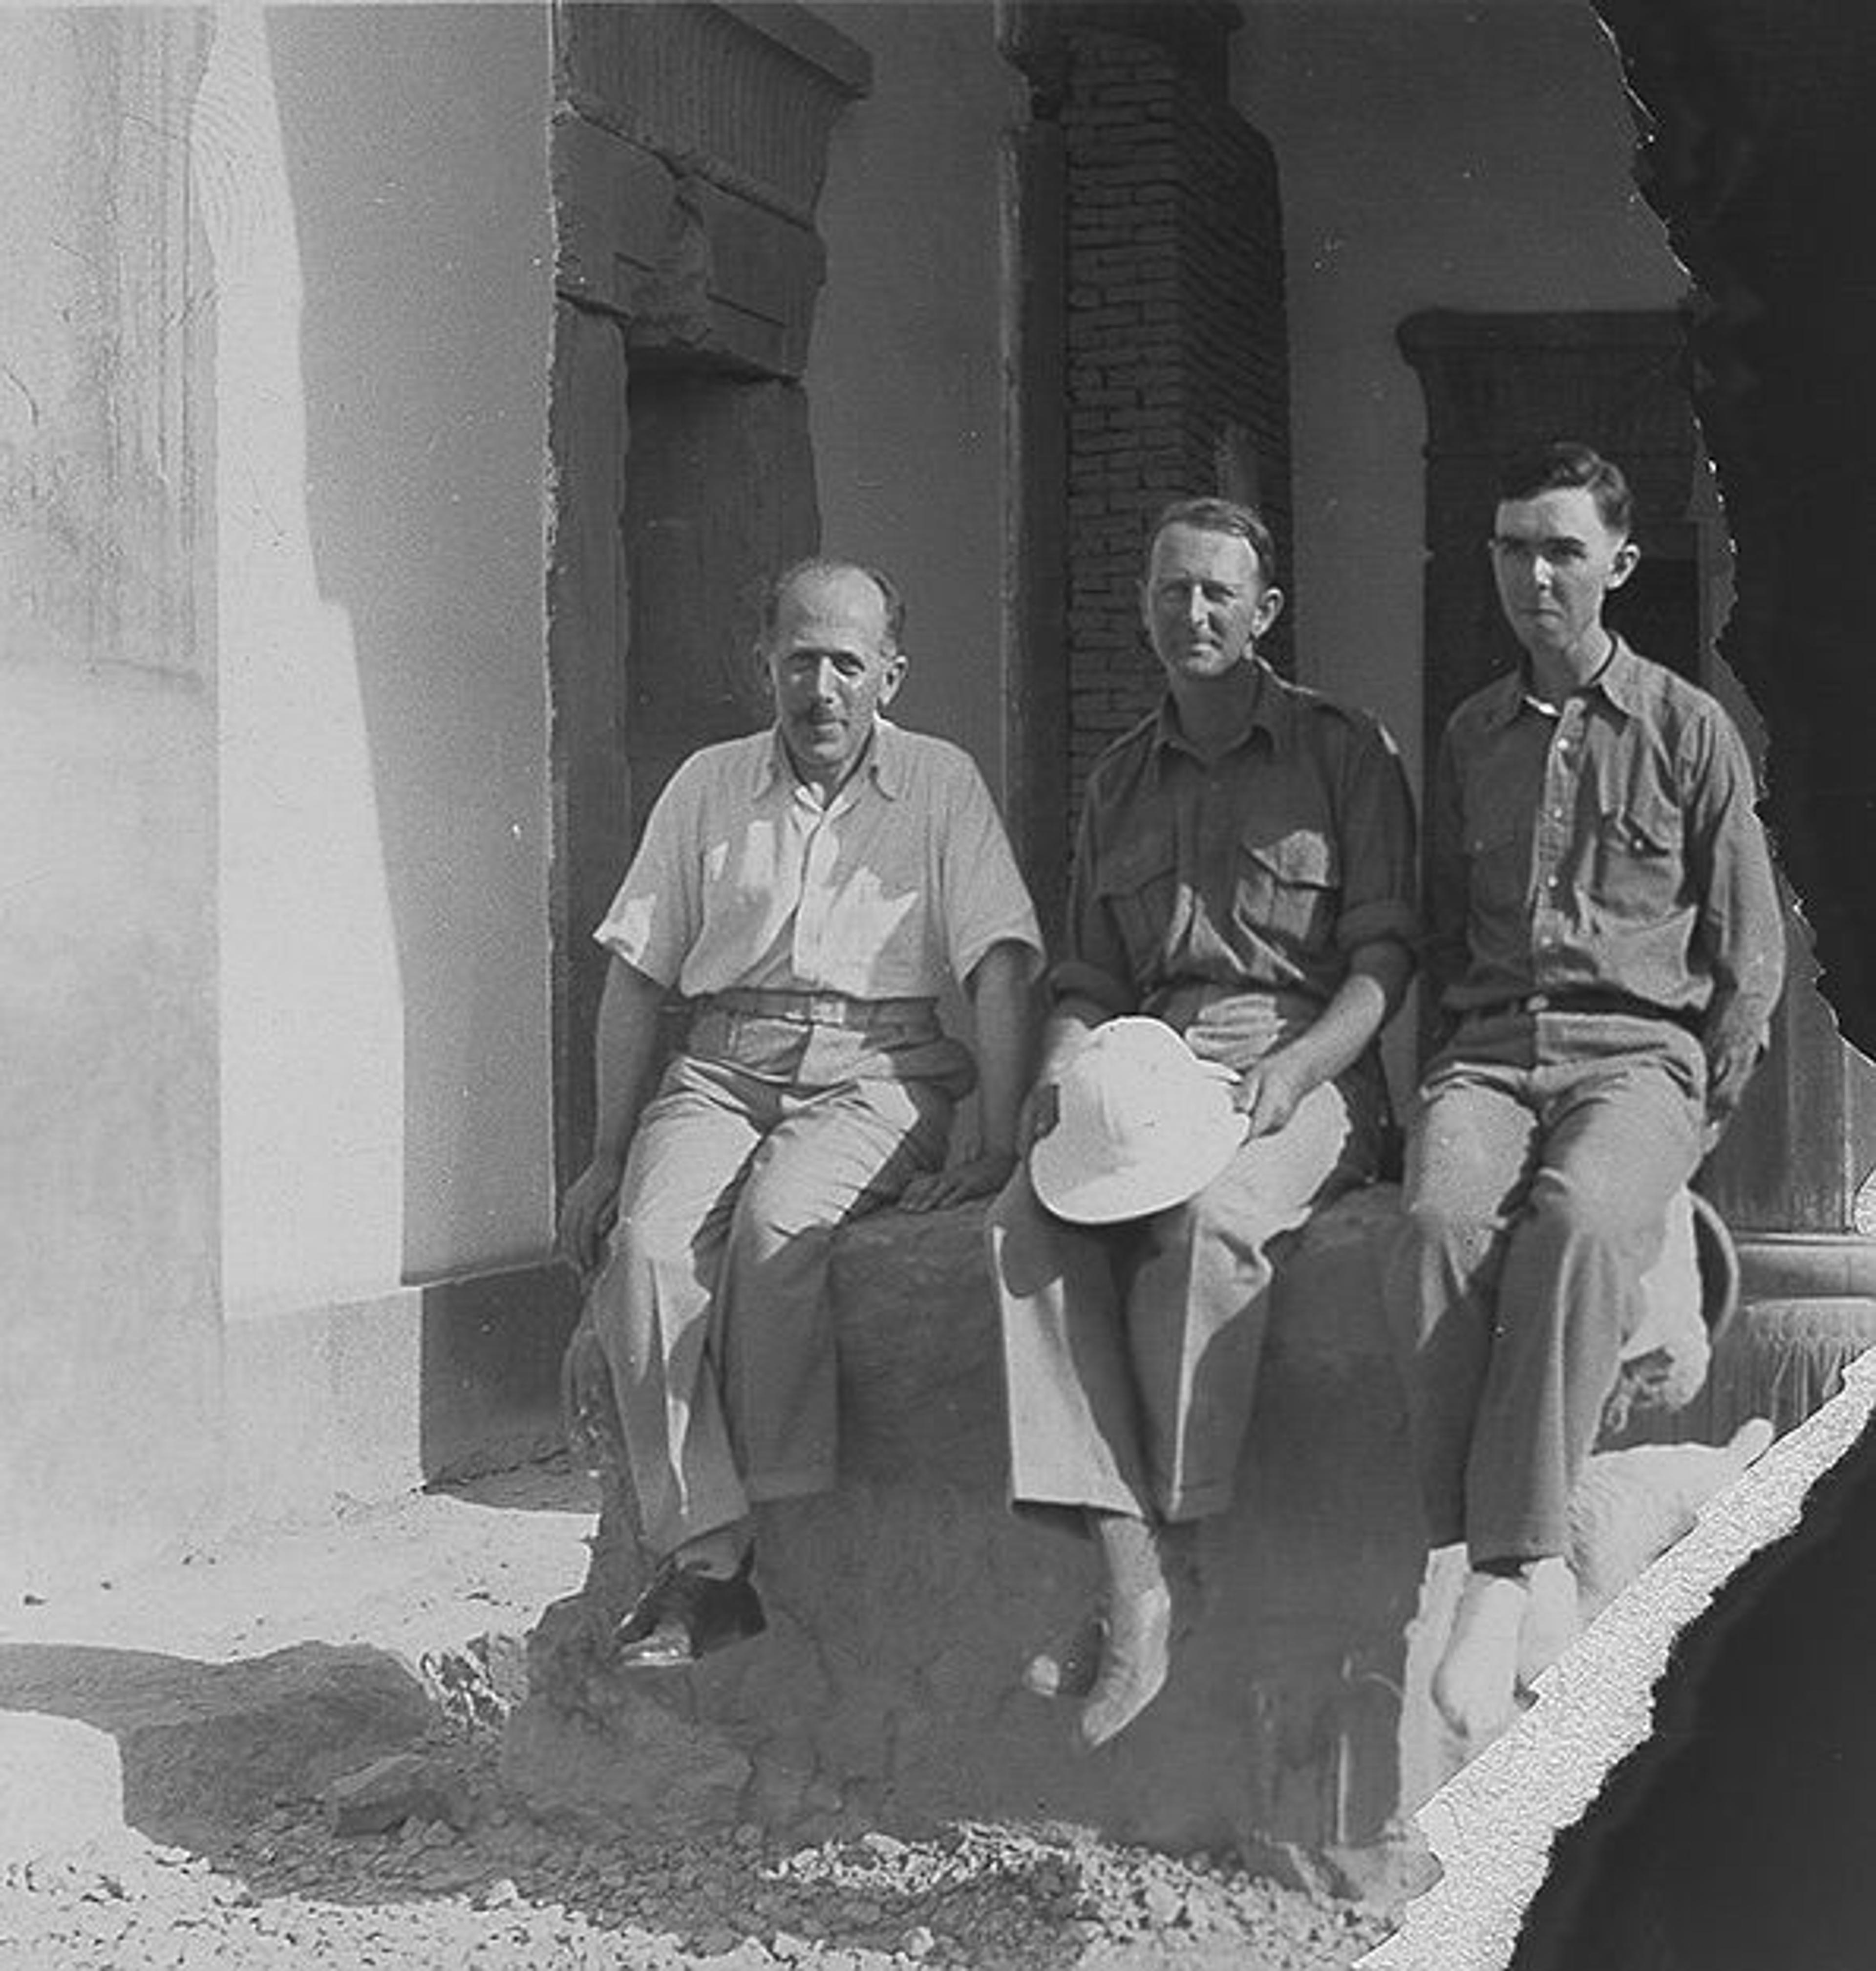 Herzfeld (left) and colleagues at Persepolis